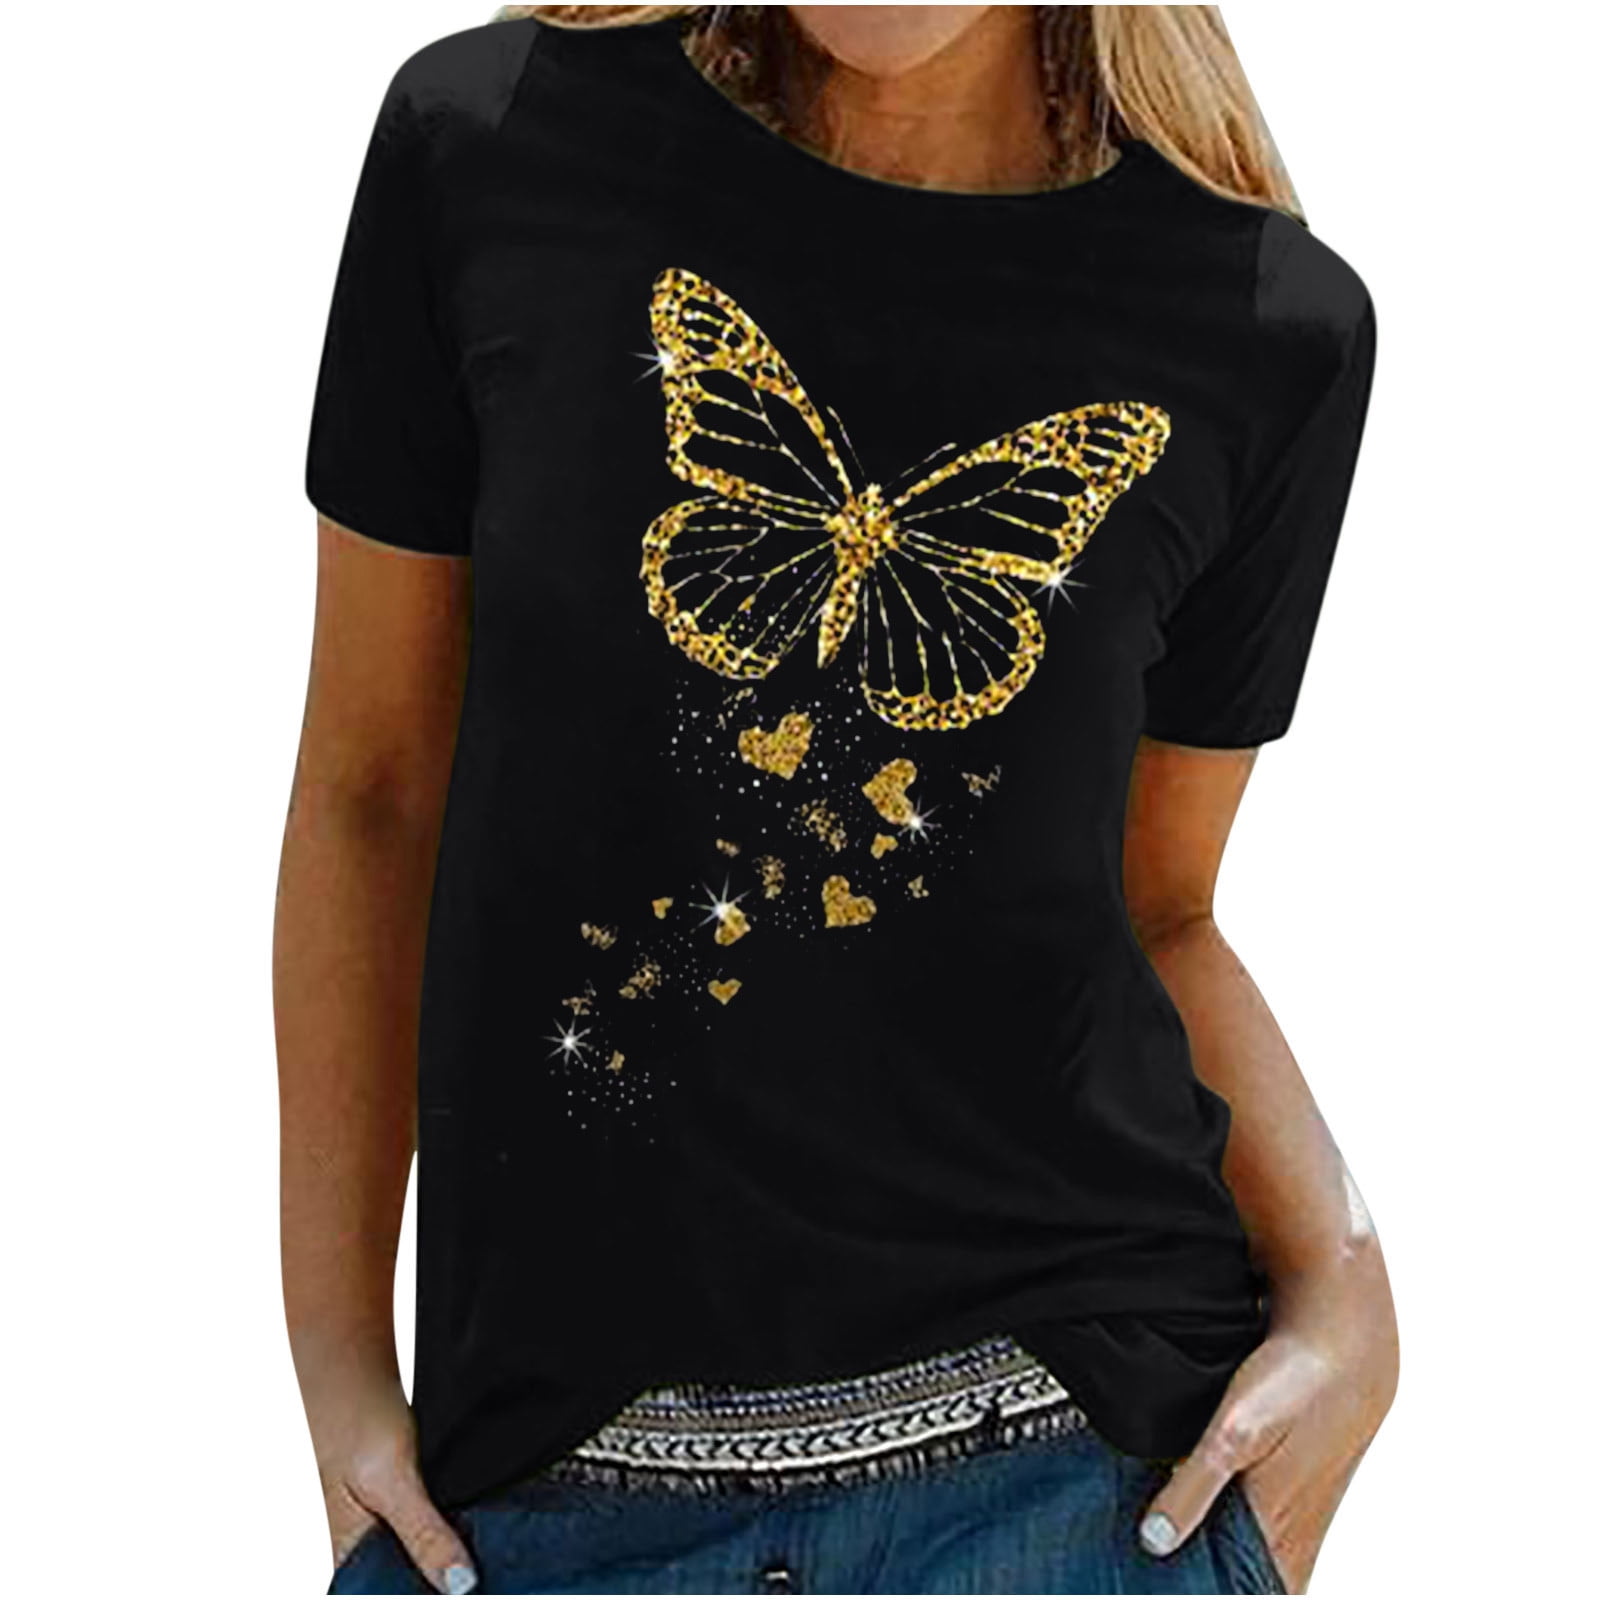 Lenago Women's Shirt Tees Funny Cute Short Sleeve Fall T Shirt Butterfly  Print Shirt Gift Tops Blouse Gift For Women on Clearance